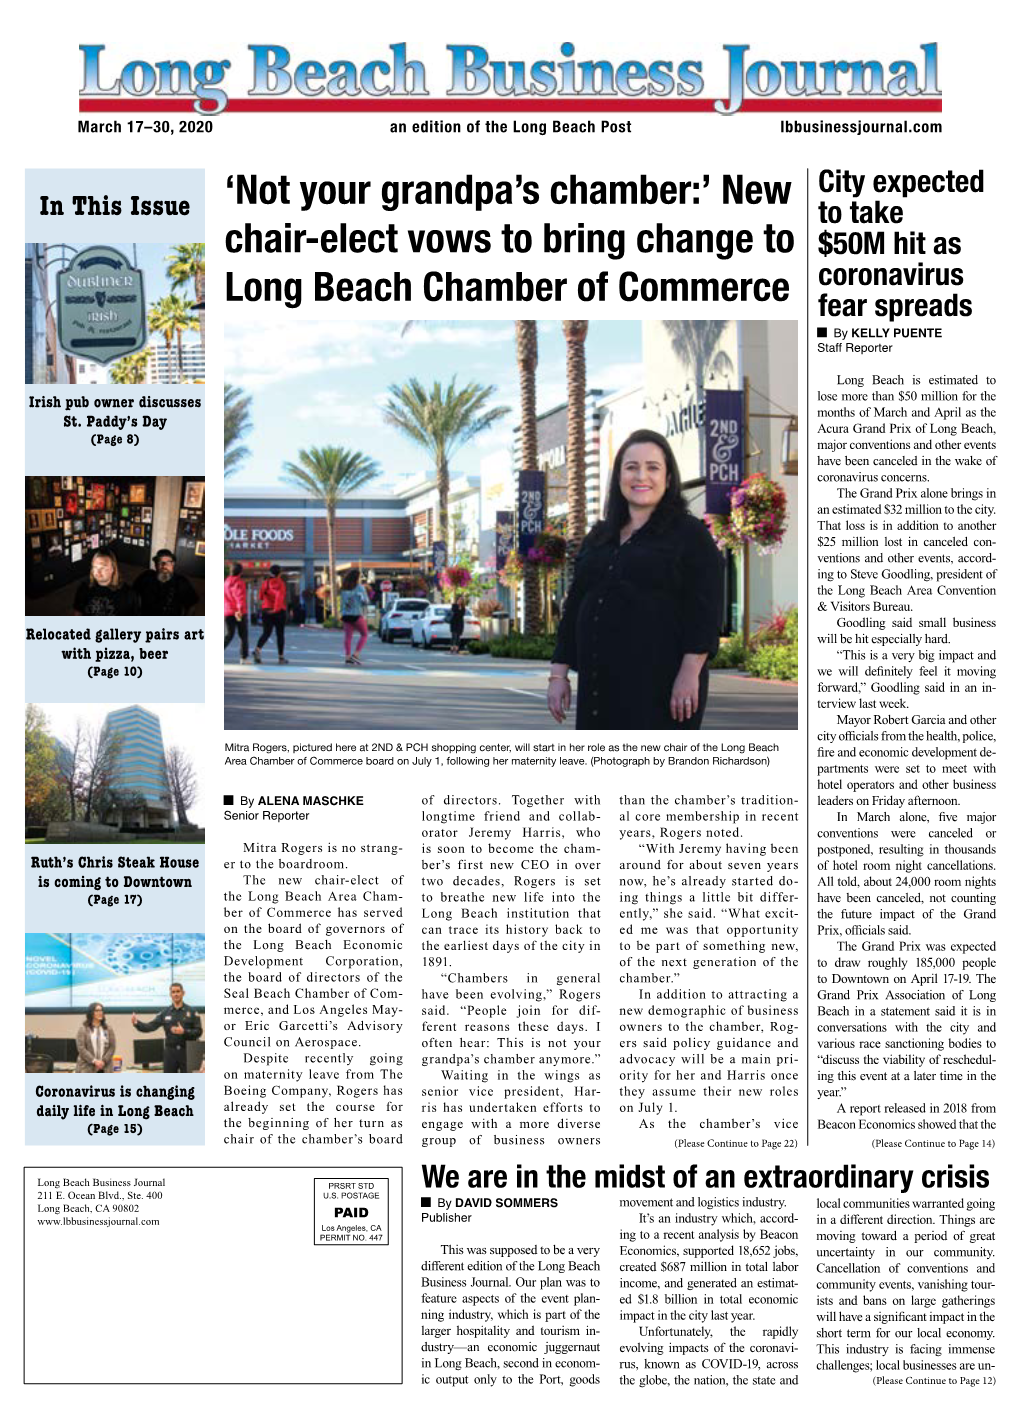 New Chair-Elect Vows to Bring Change to Long Beach Chamber Of